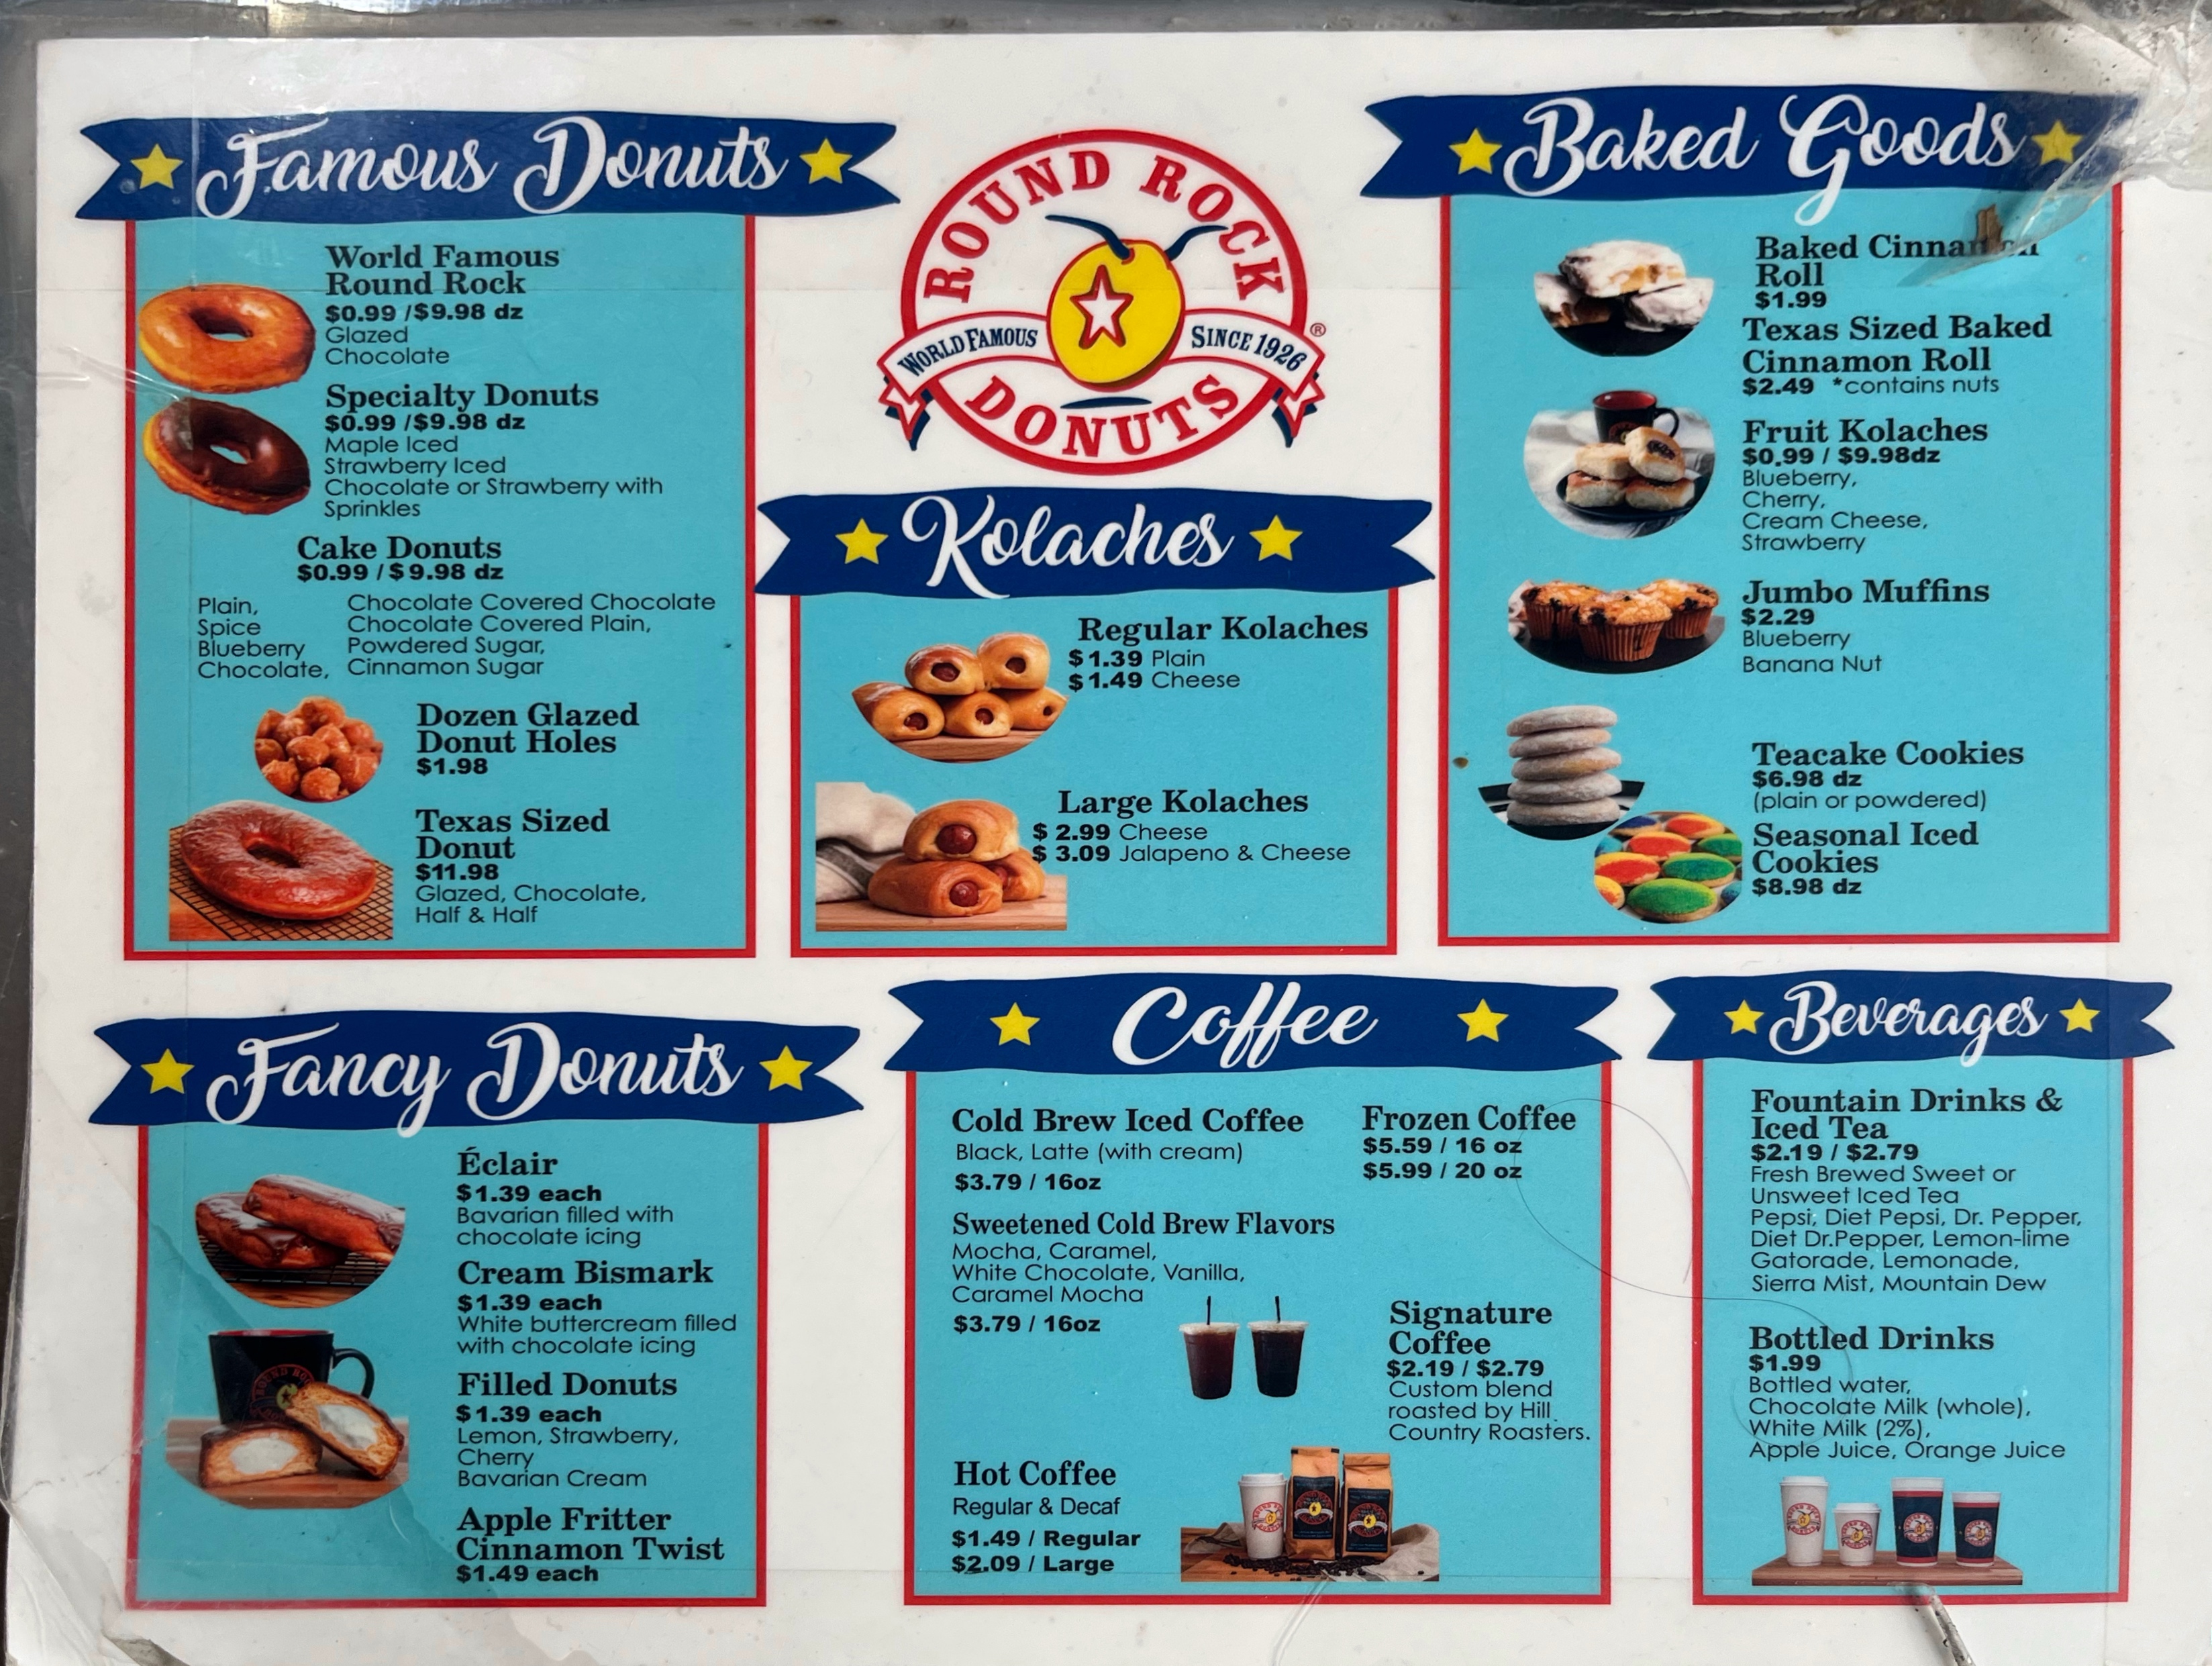 Round Rock Donuts menu and prices